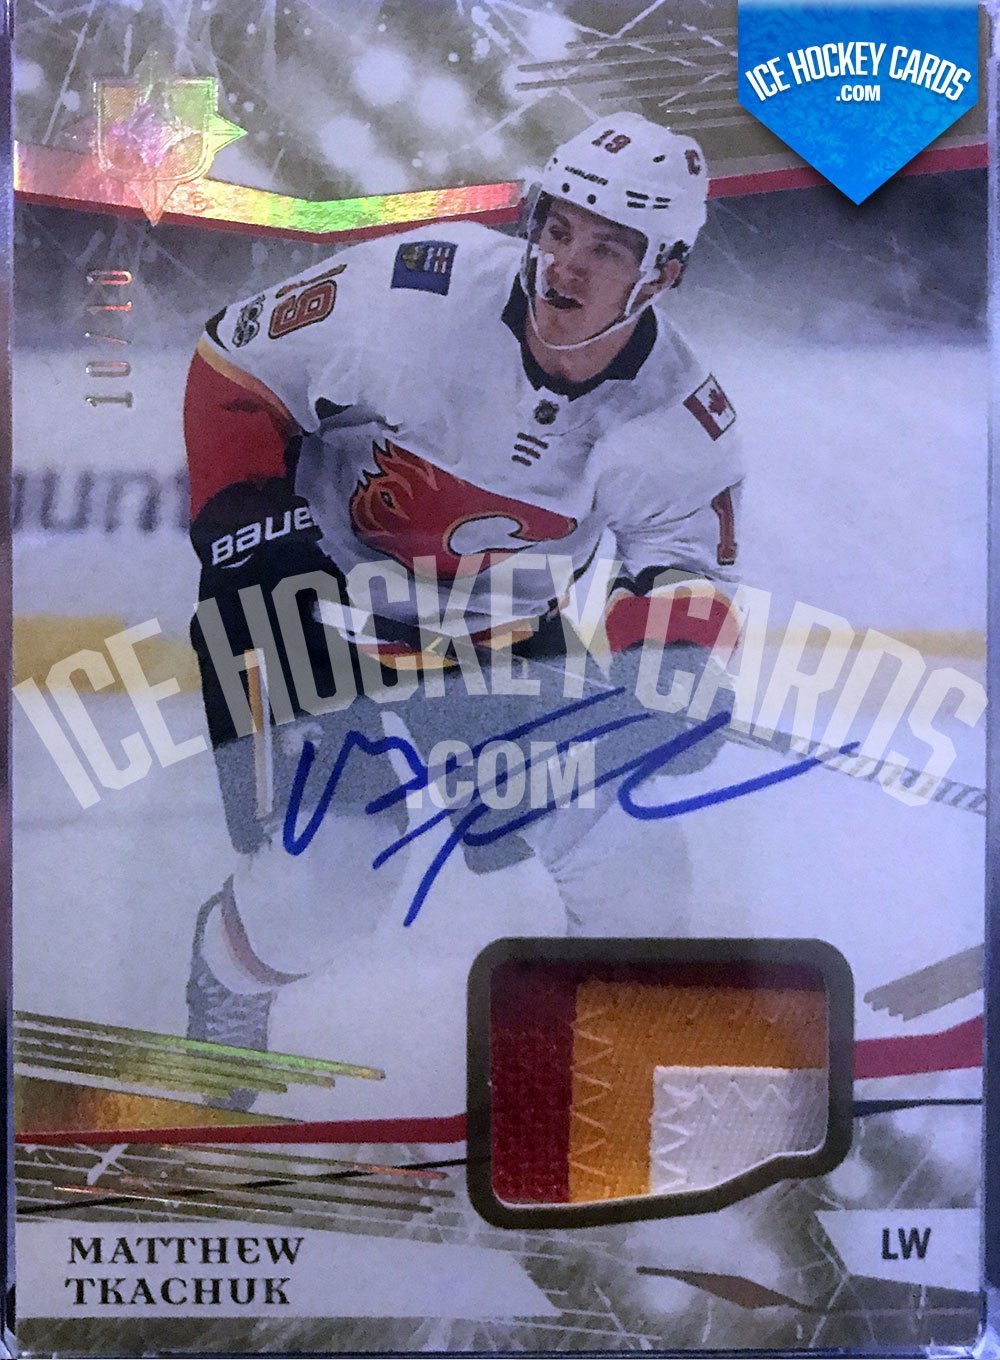 Upper Deck - Ultimate Collection 17-18 - Matthew Tkachuk - Auto Patch 3 Colors 10 of 10 RARE